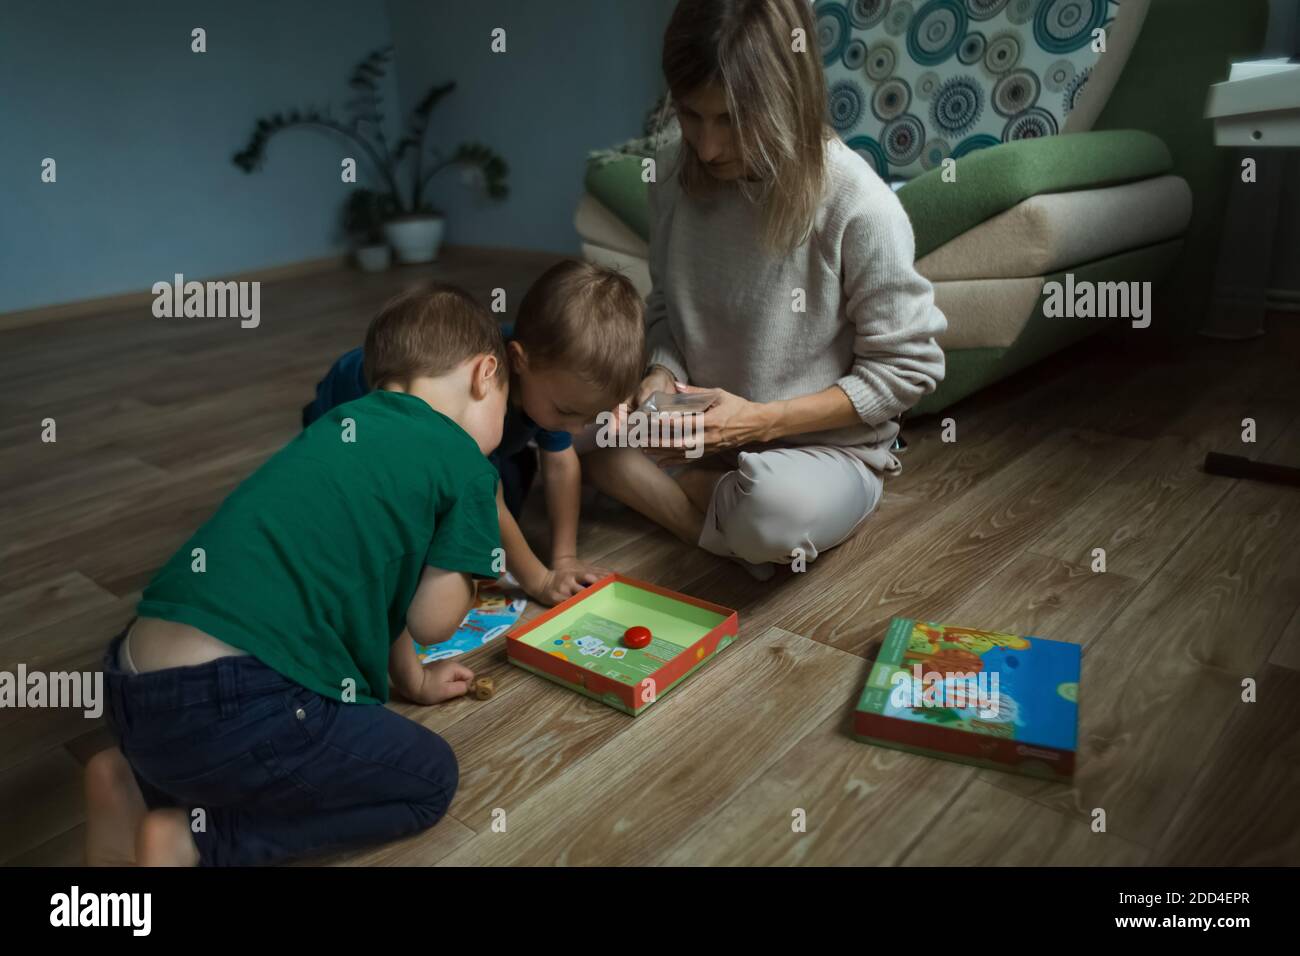 Mother with children playing a board game on the floor. Stock Photo